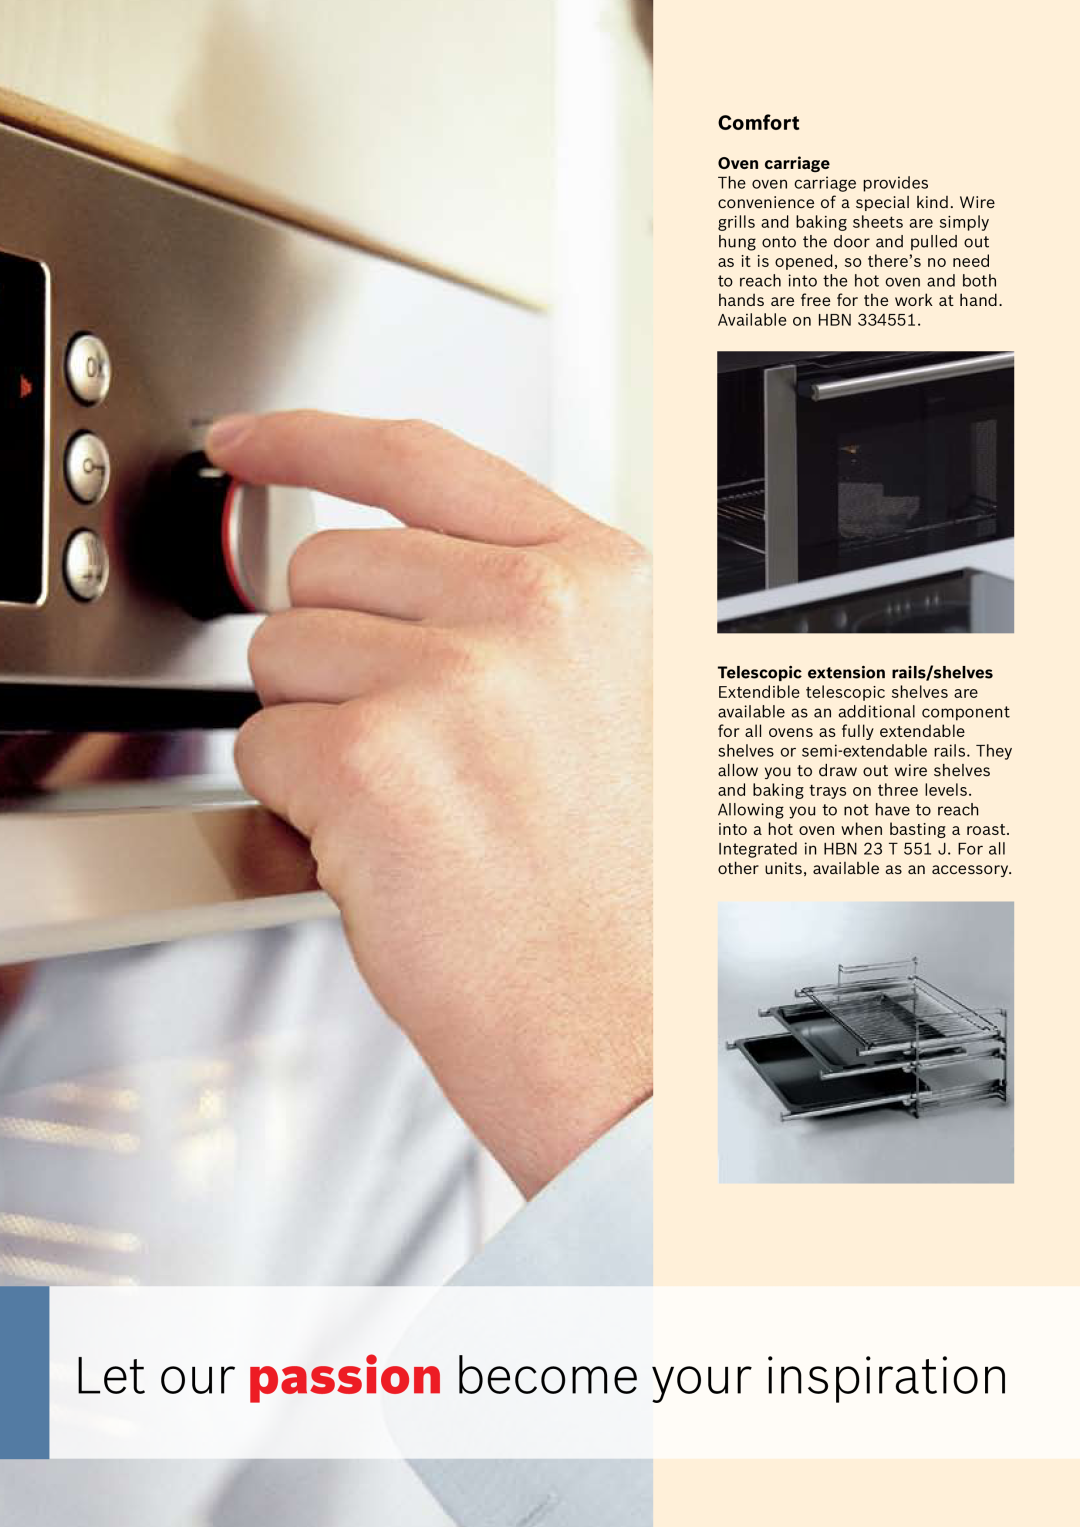 Bosch Appliances Oven Carriage manual Let our passion become your inspiration, Comfort, Oven carriage 